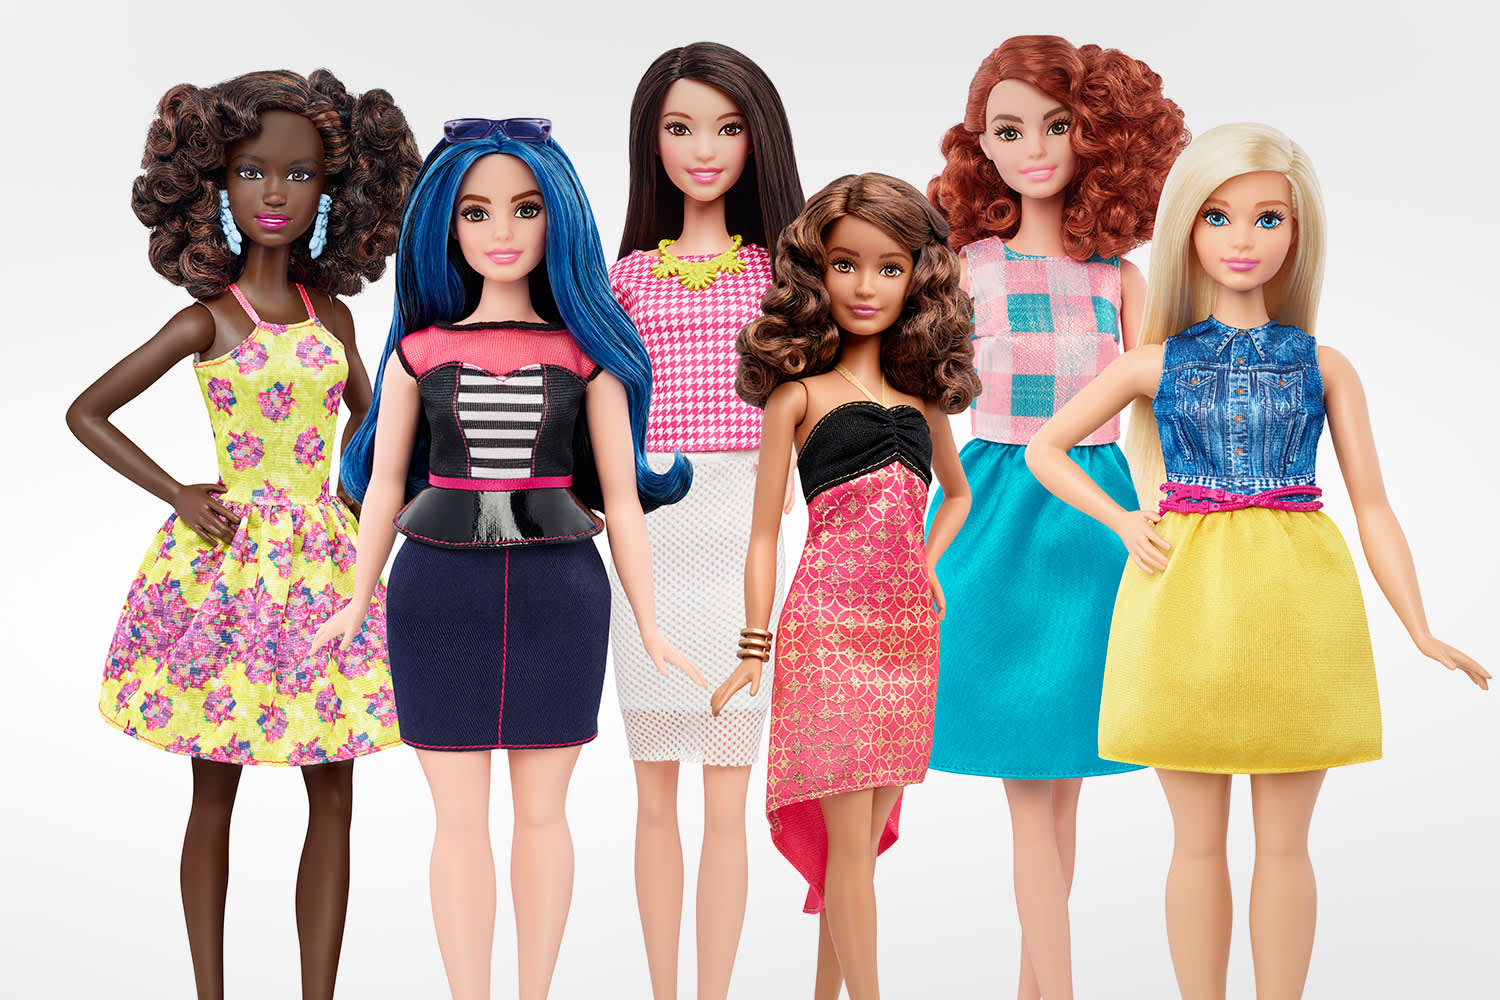 Sige hans lokalisere Barbie gets 'real' with latest makeover: New body types